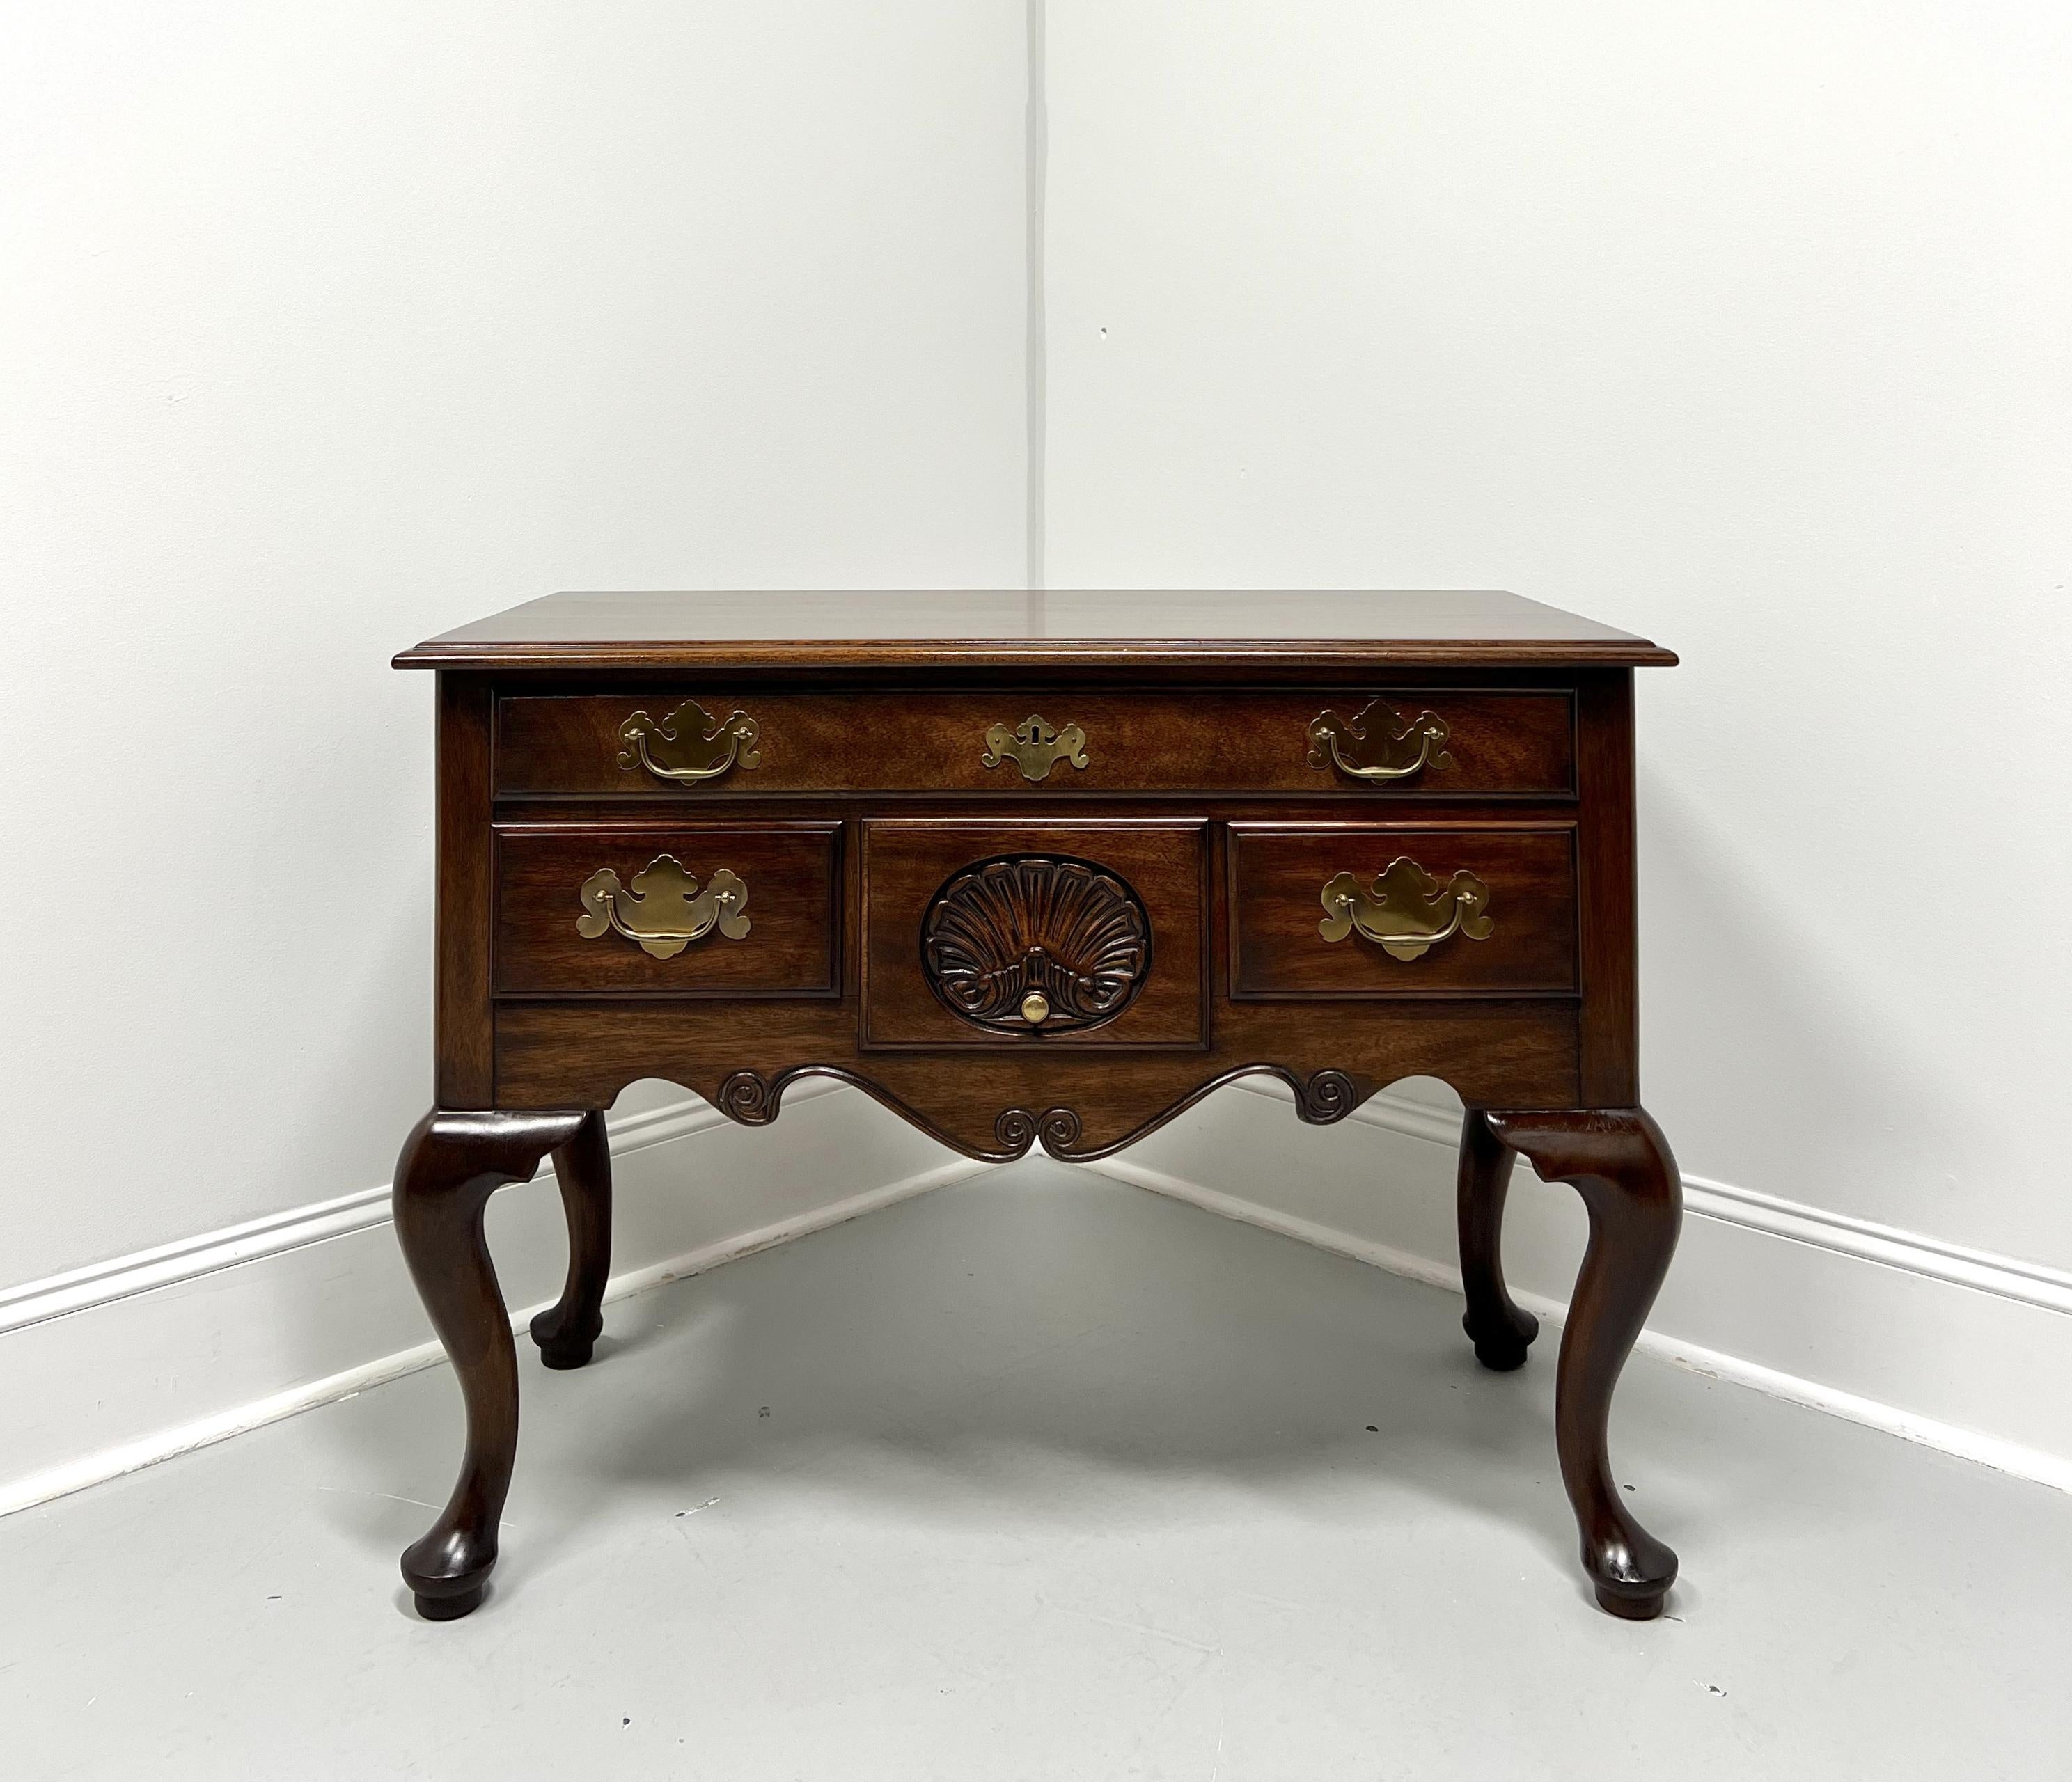 A Philadelphia lowboy chest in the Queen Anne style by Henkel Harris, of Winchester, Virginia, USA. Solid mahogany, brass hardware, ogee edge to the top, carved shell to center drawer front, carved apron, cabriole legs, and pad feet. Features one